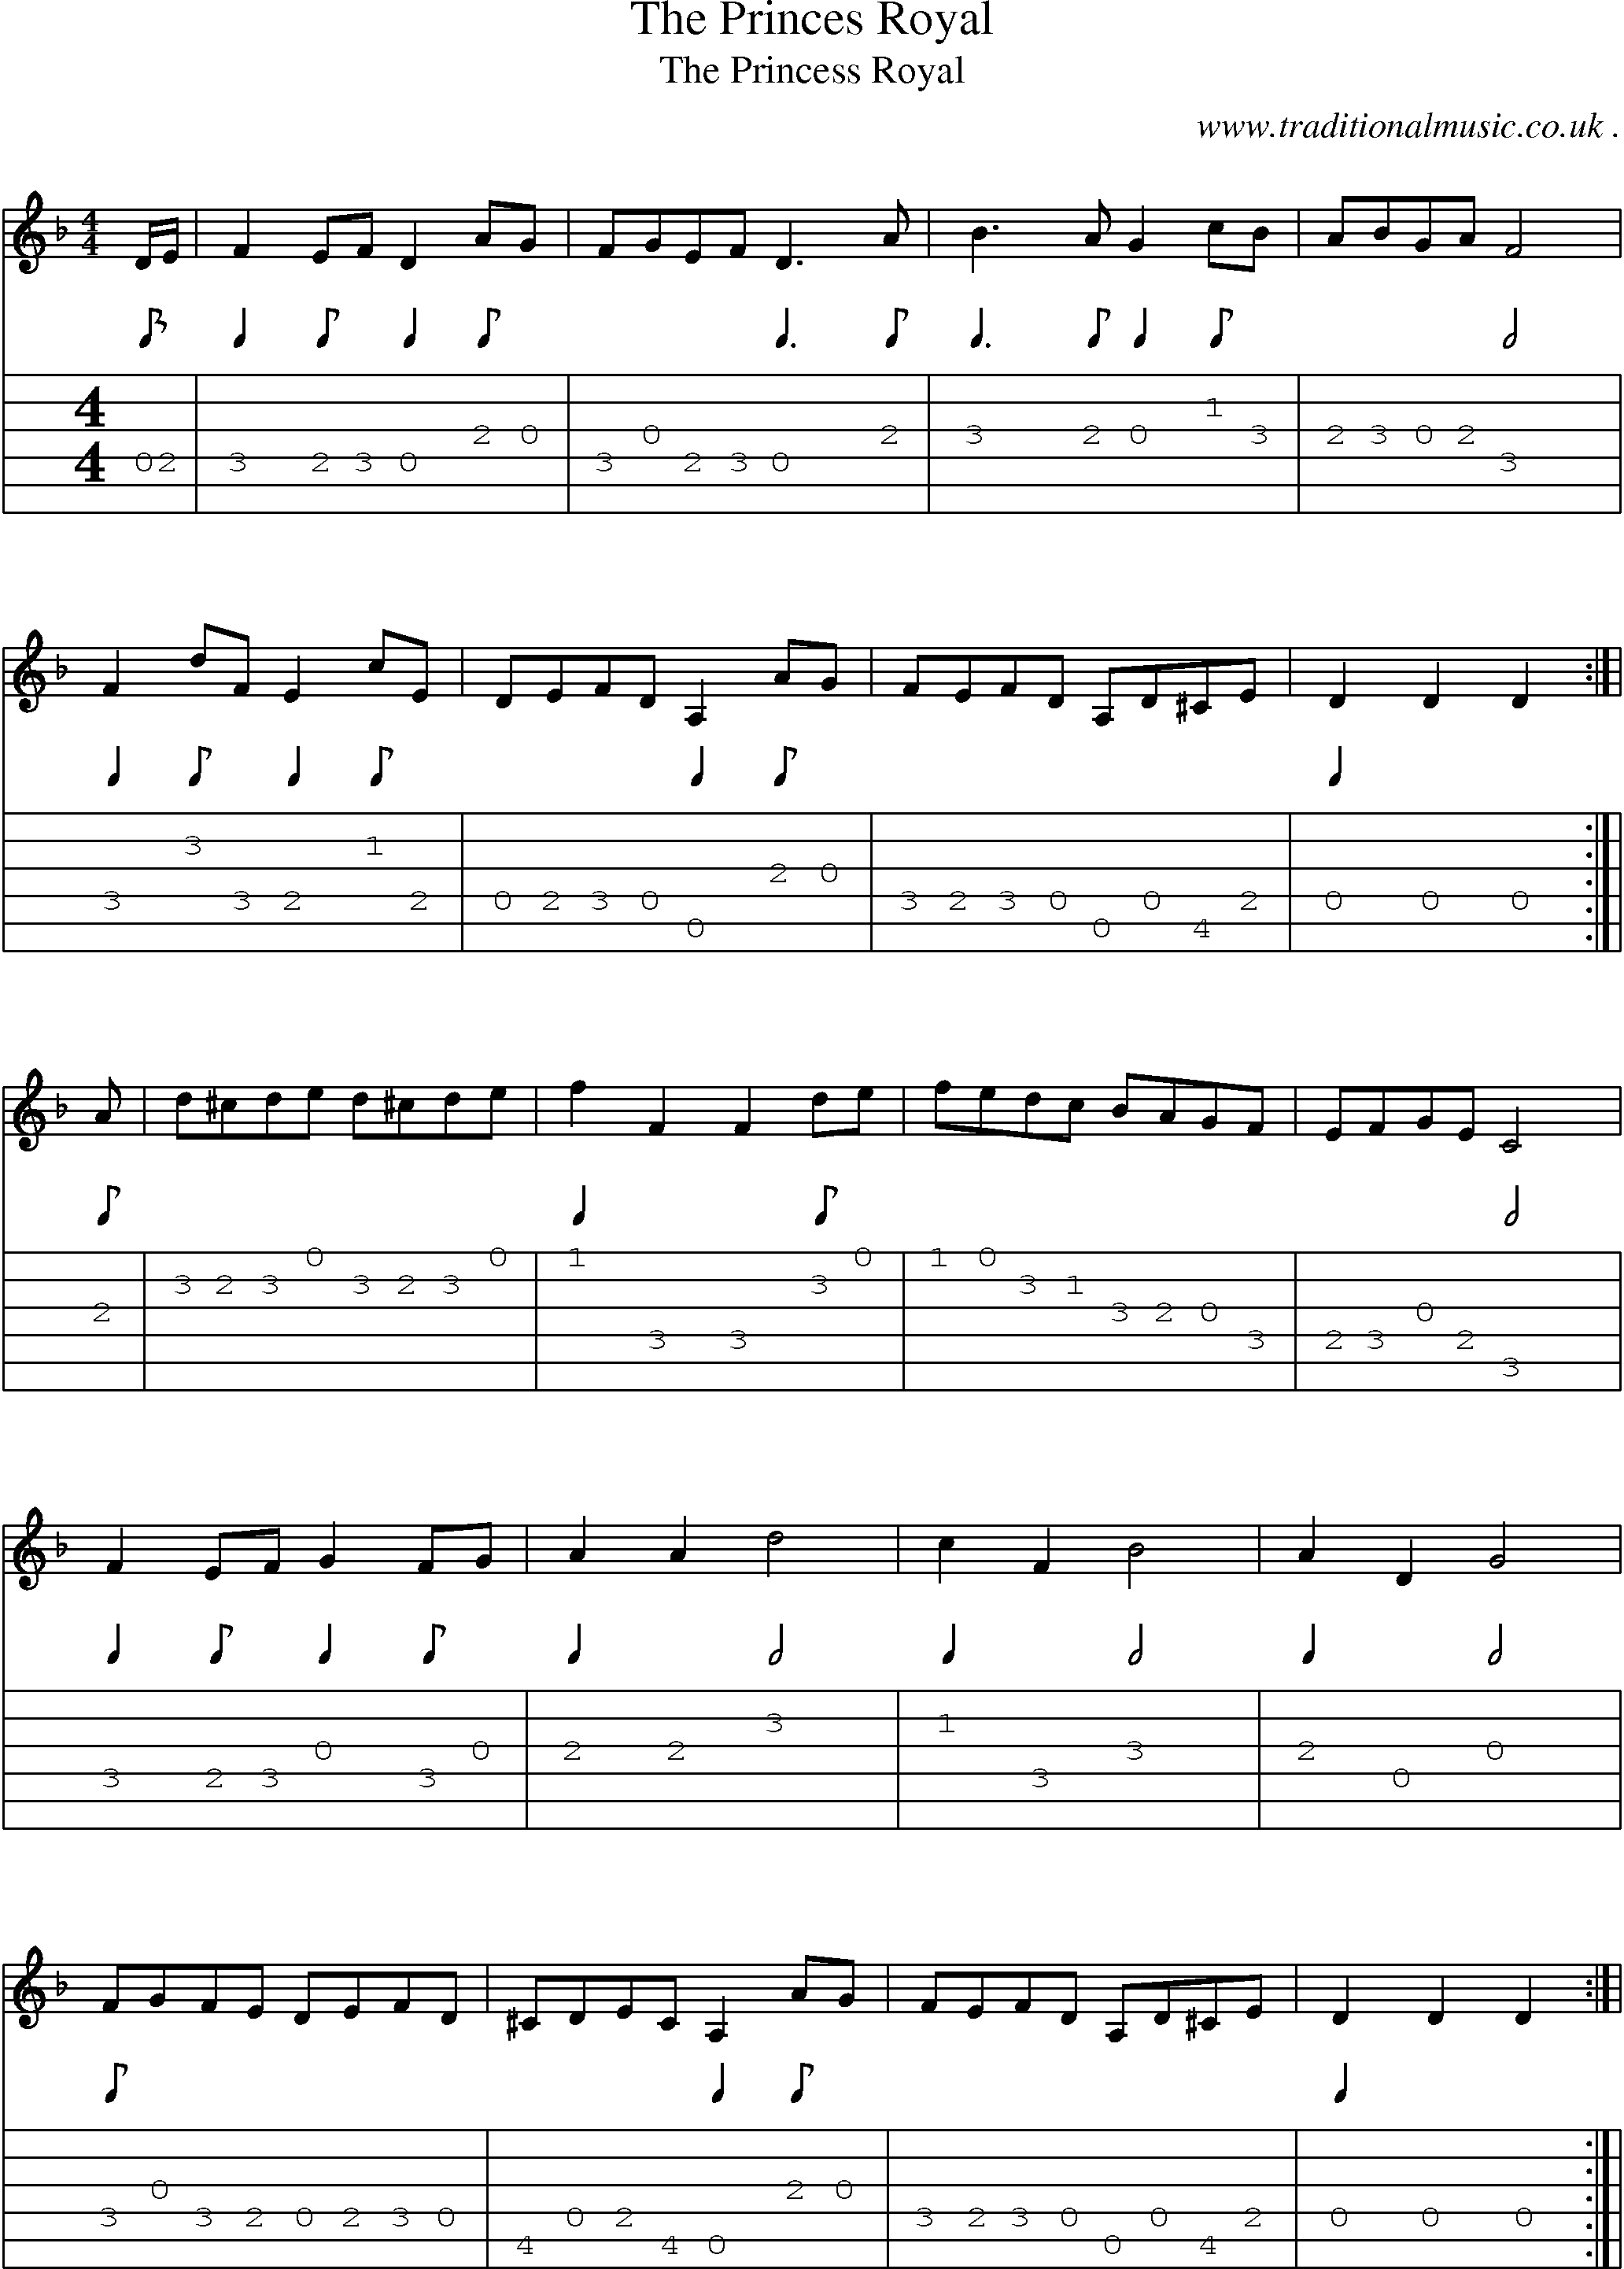 Sheet-Music and Guitar Tabs for The Princes Royal